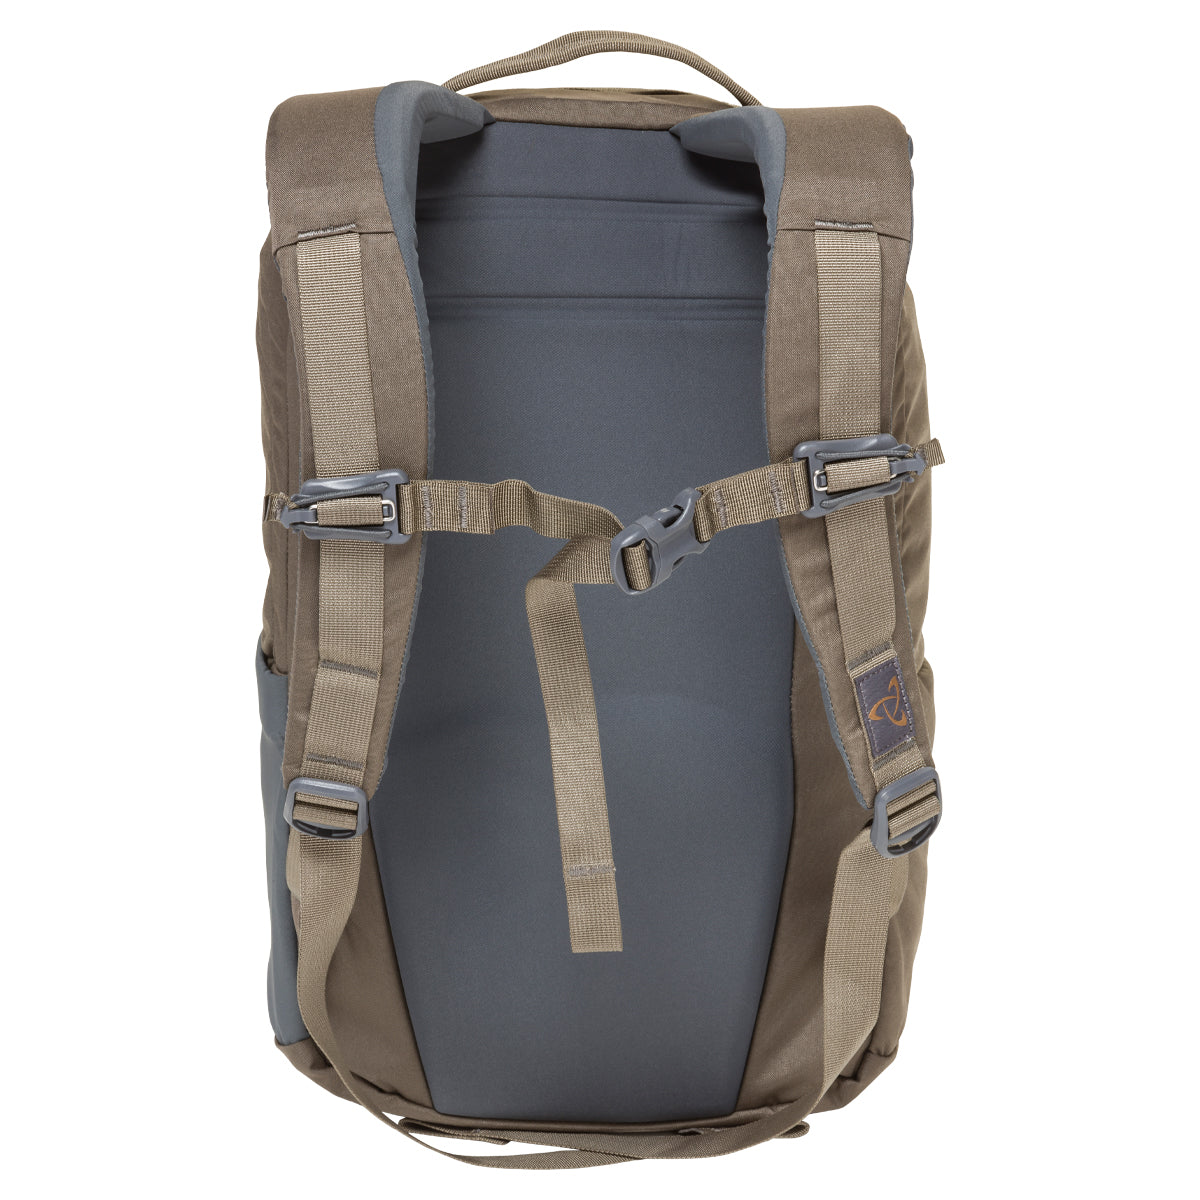 Mystery Ranch Rip Ruck 15 Backpack in  by GOHUNT | Mystery Ranch - GOHUNT Shop